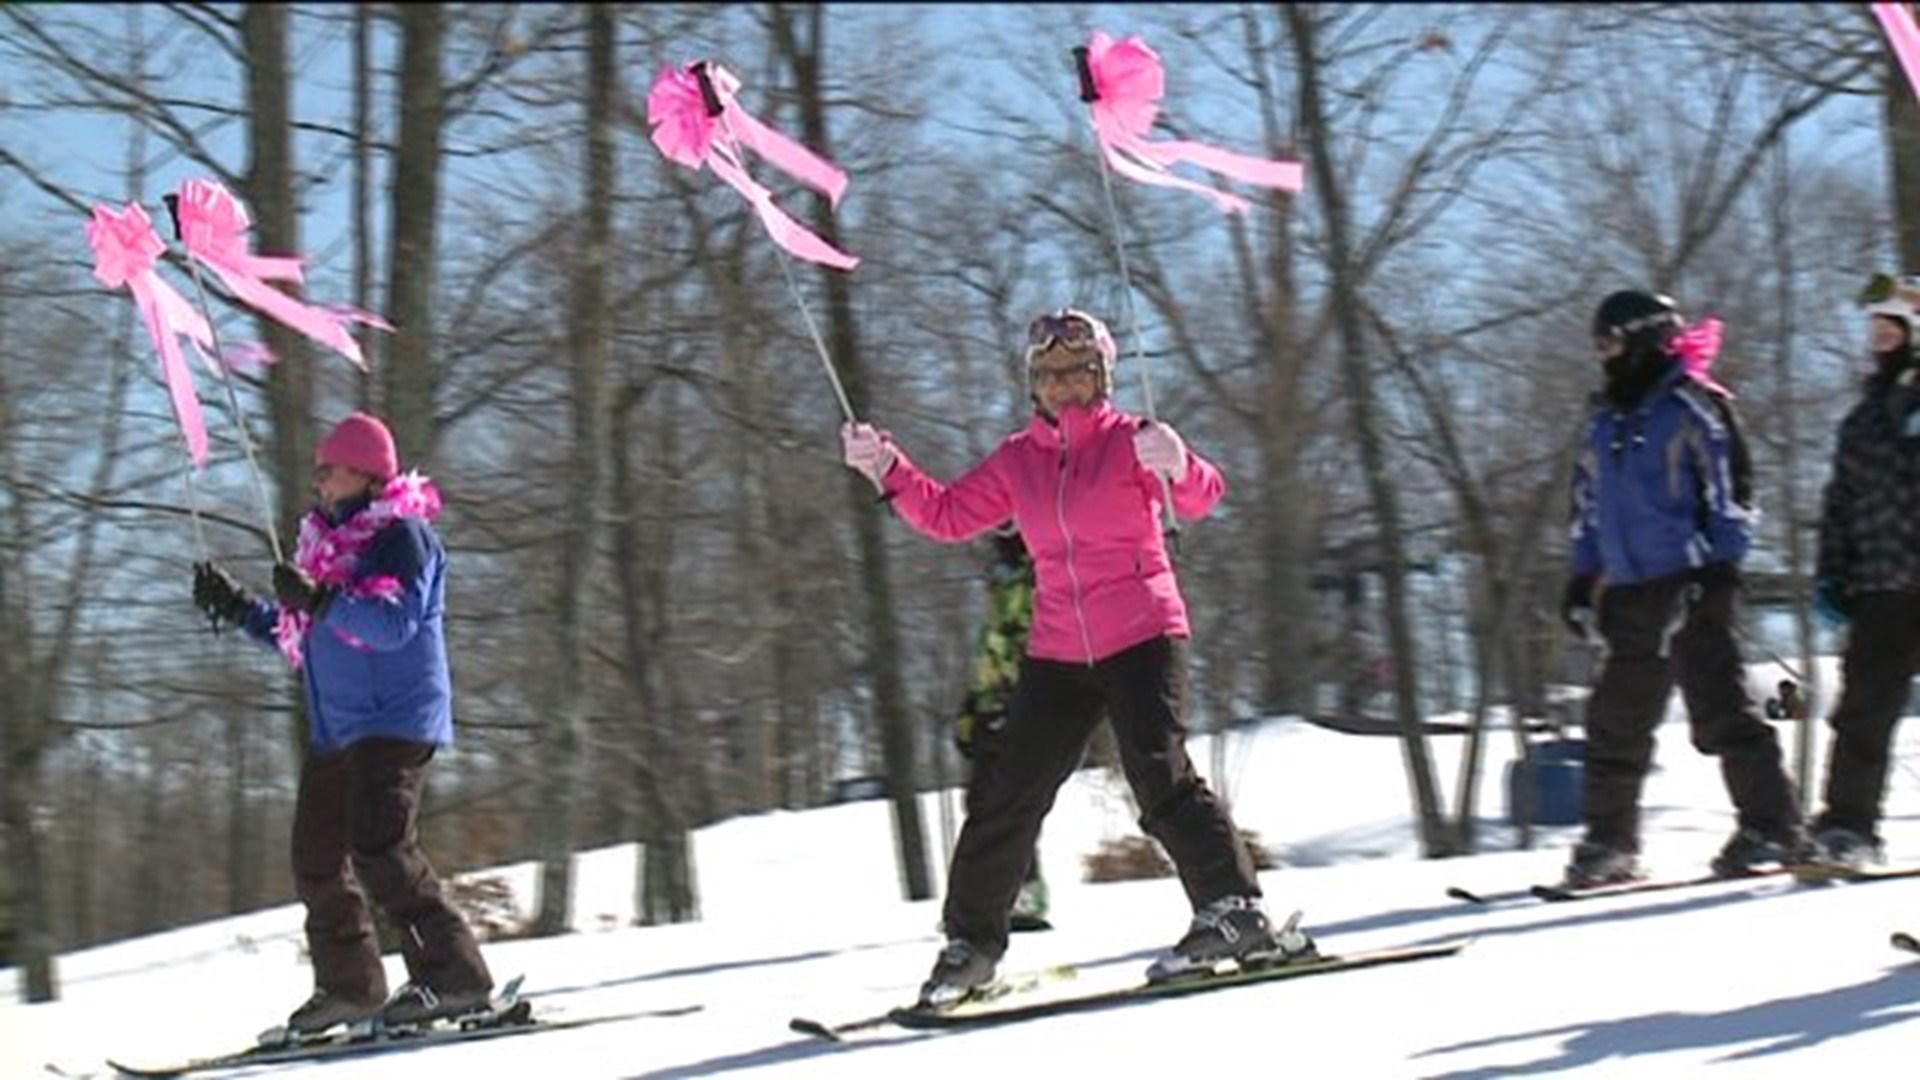 Annual Ski for the Cure Event at Jack Frost Ski Resort